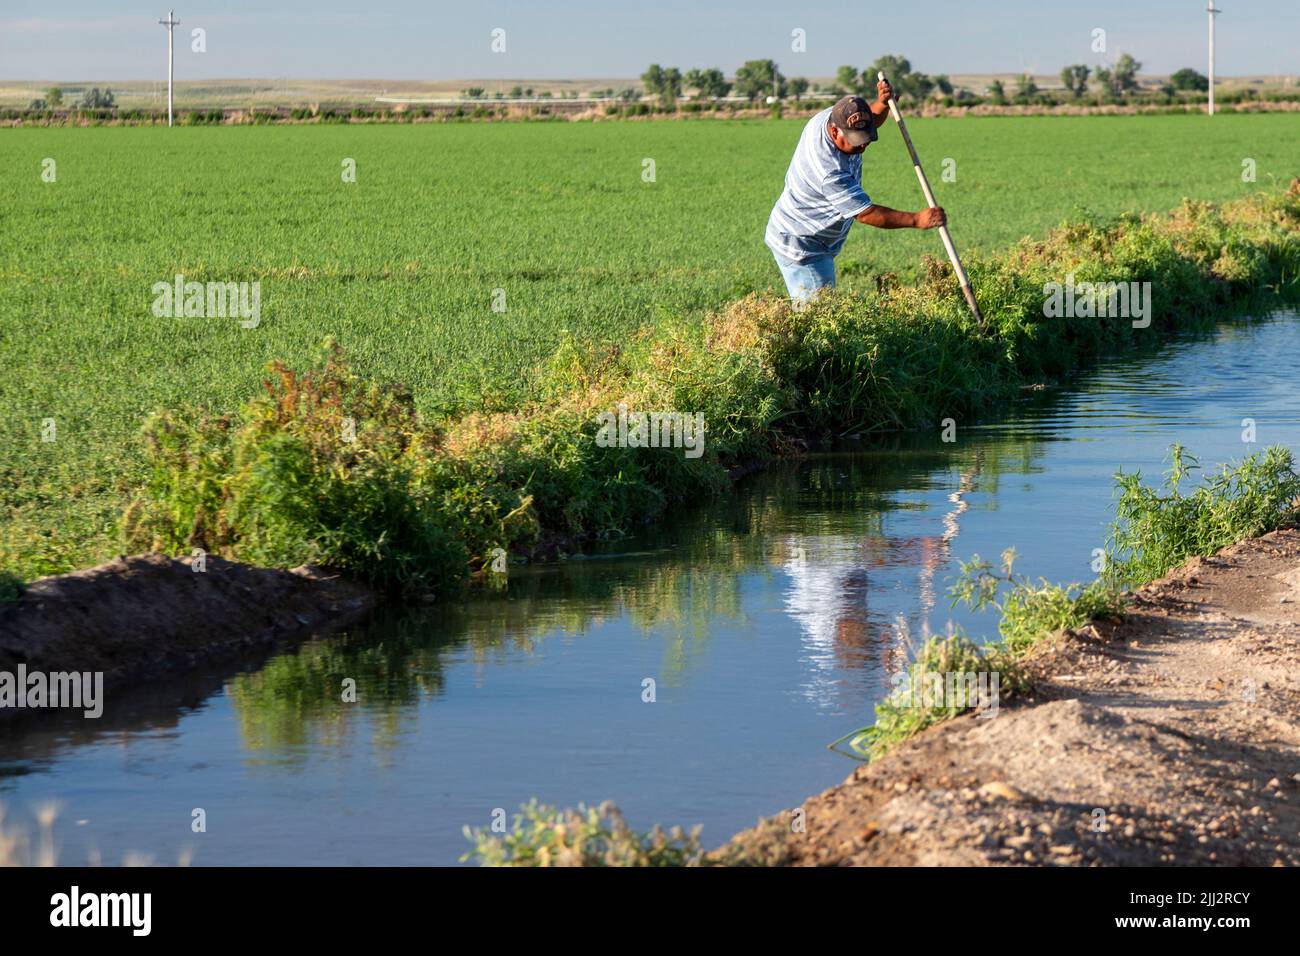 Holly, Colorado - A farmer uses a shovel to direct water from an irigation canal to his field in southeast Colorado. Stock Photo